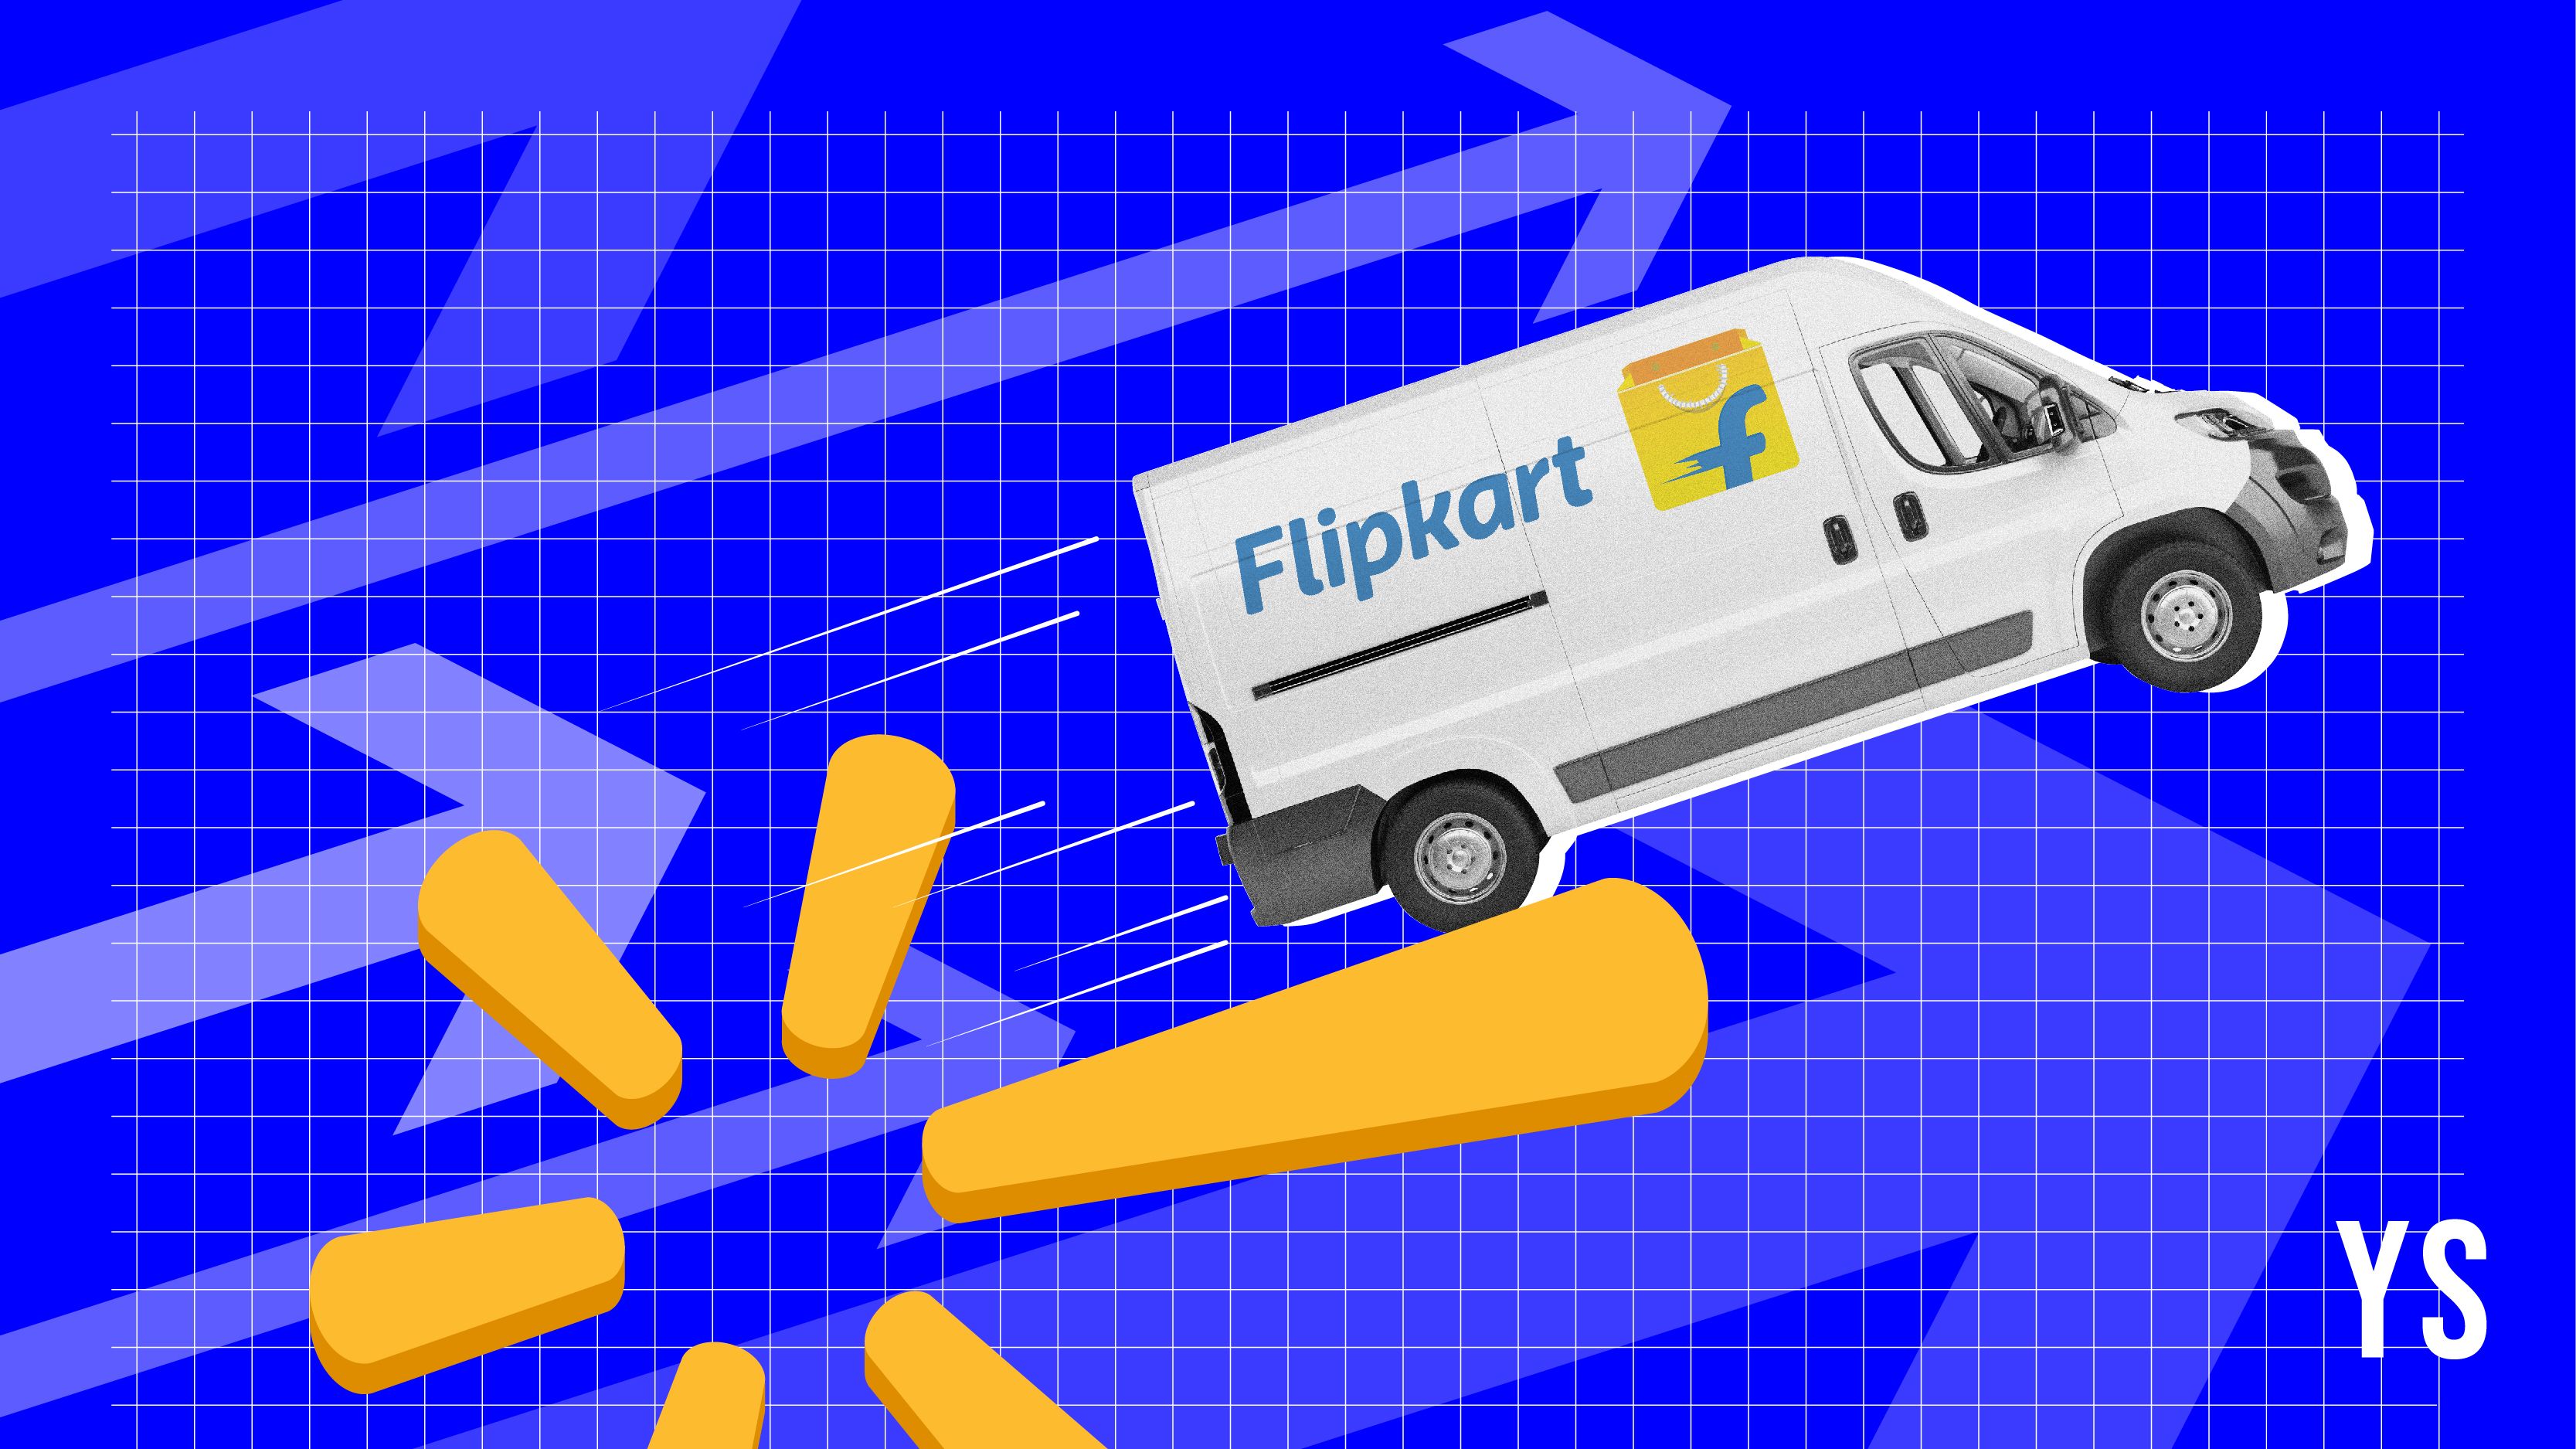 Flipkart and China boost Walmart's advertising revenue and global sales